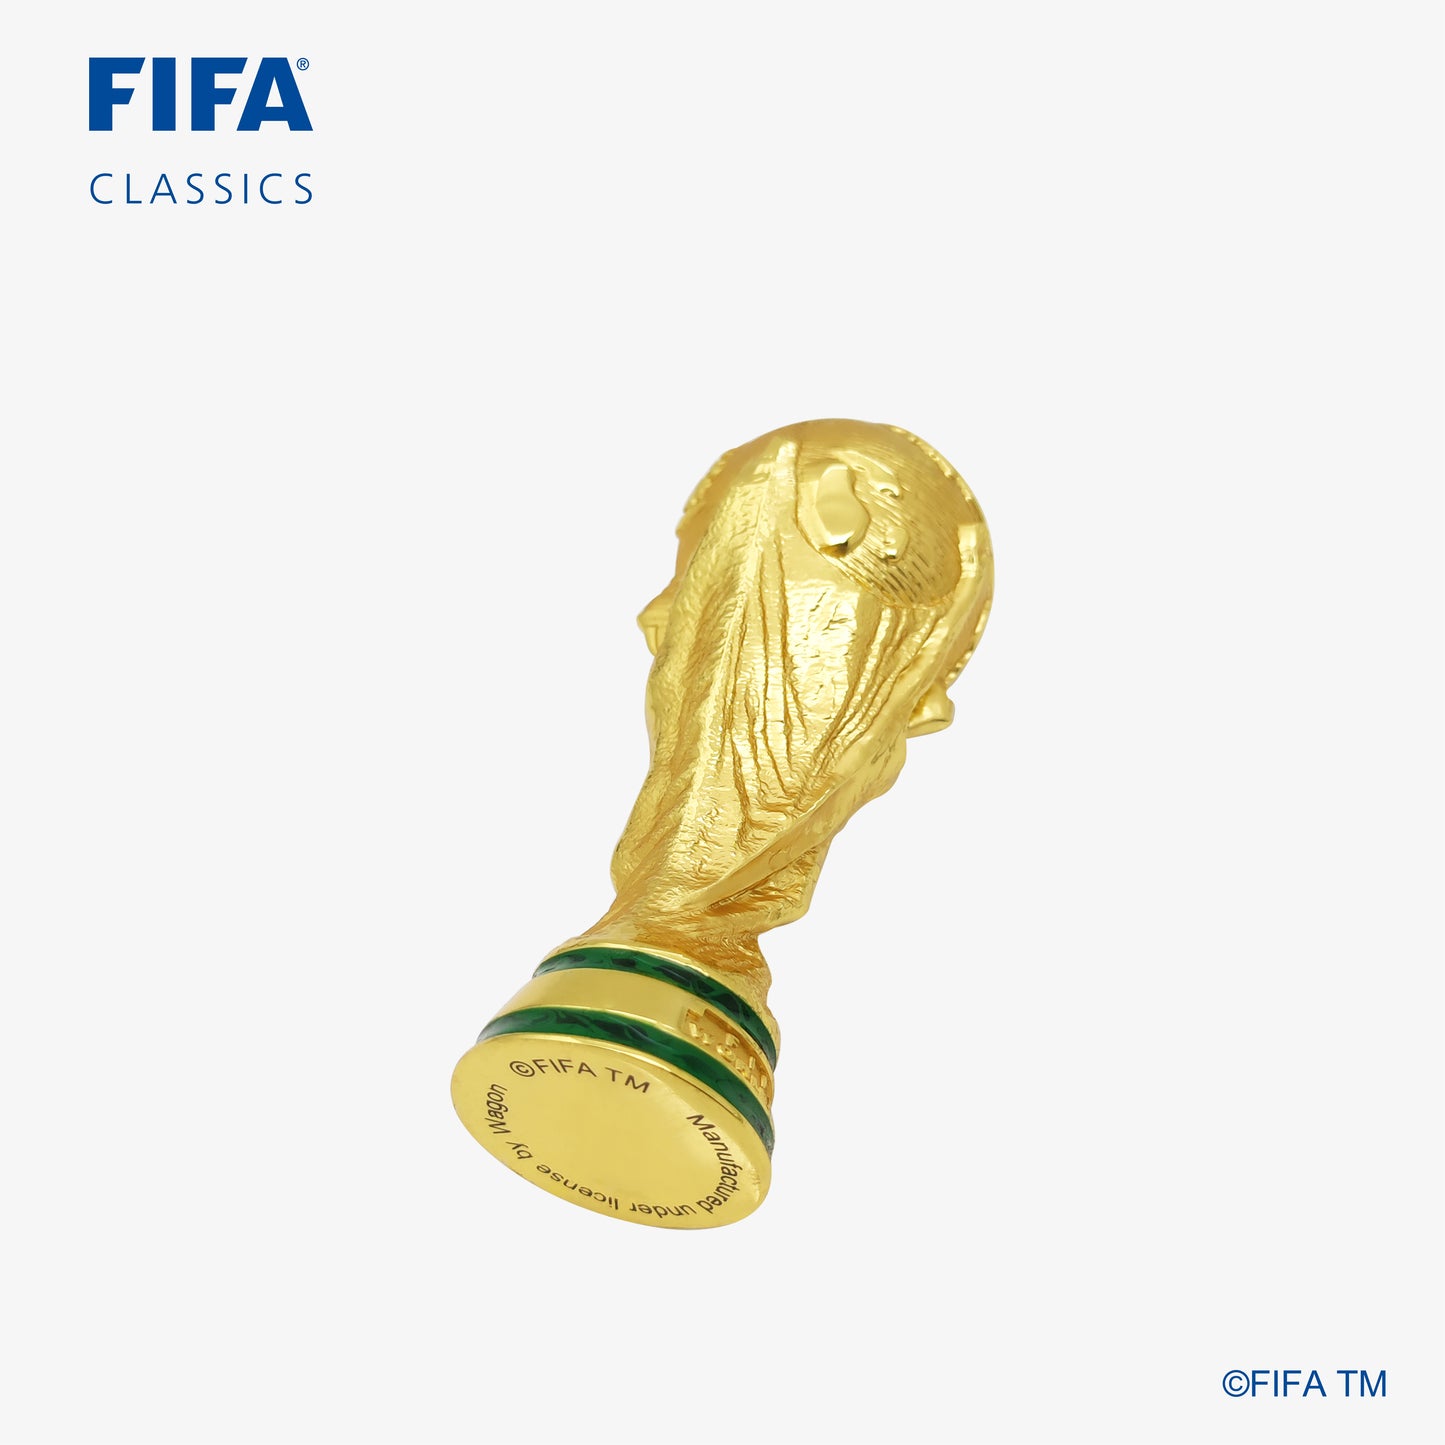 100mm World Cup Trophy Replica